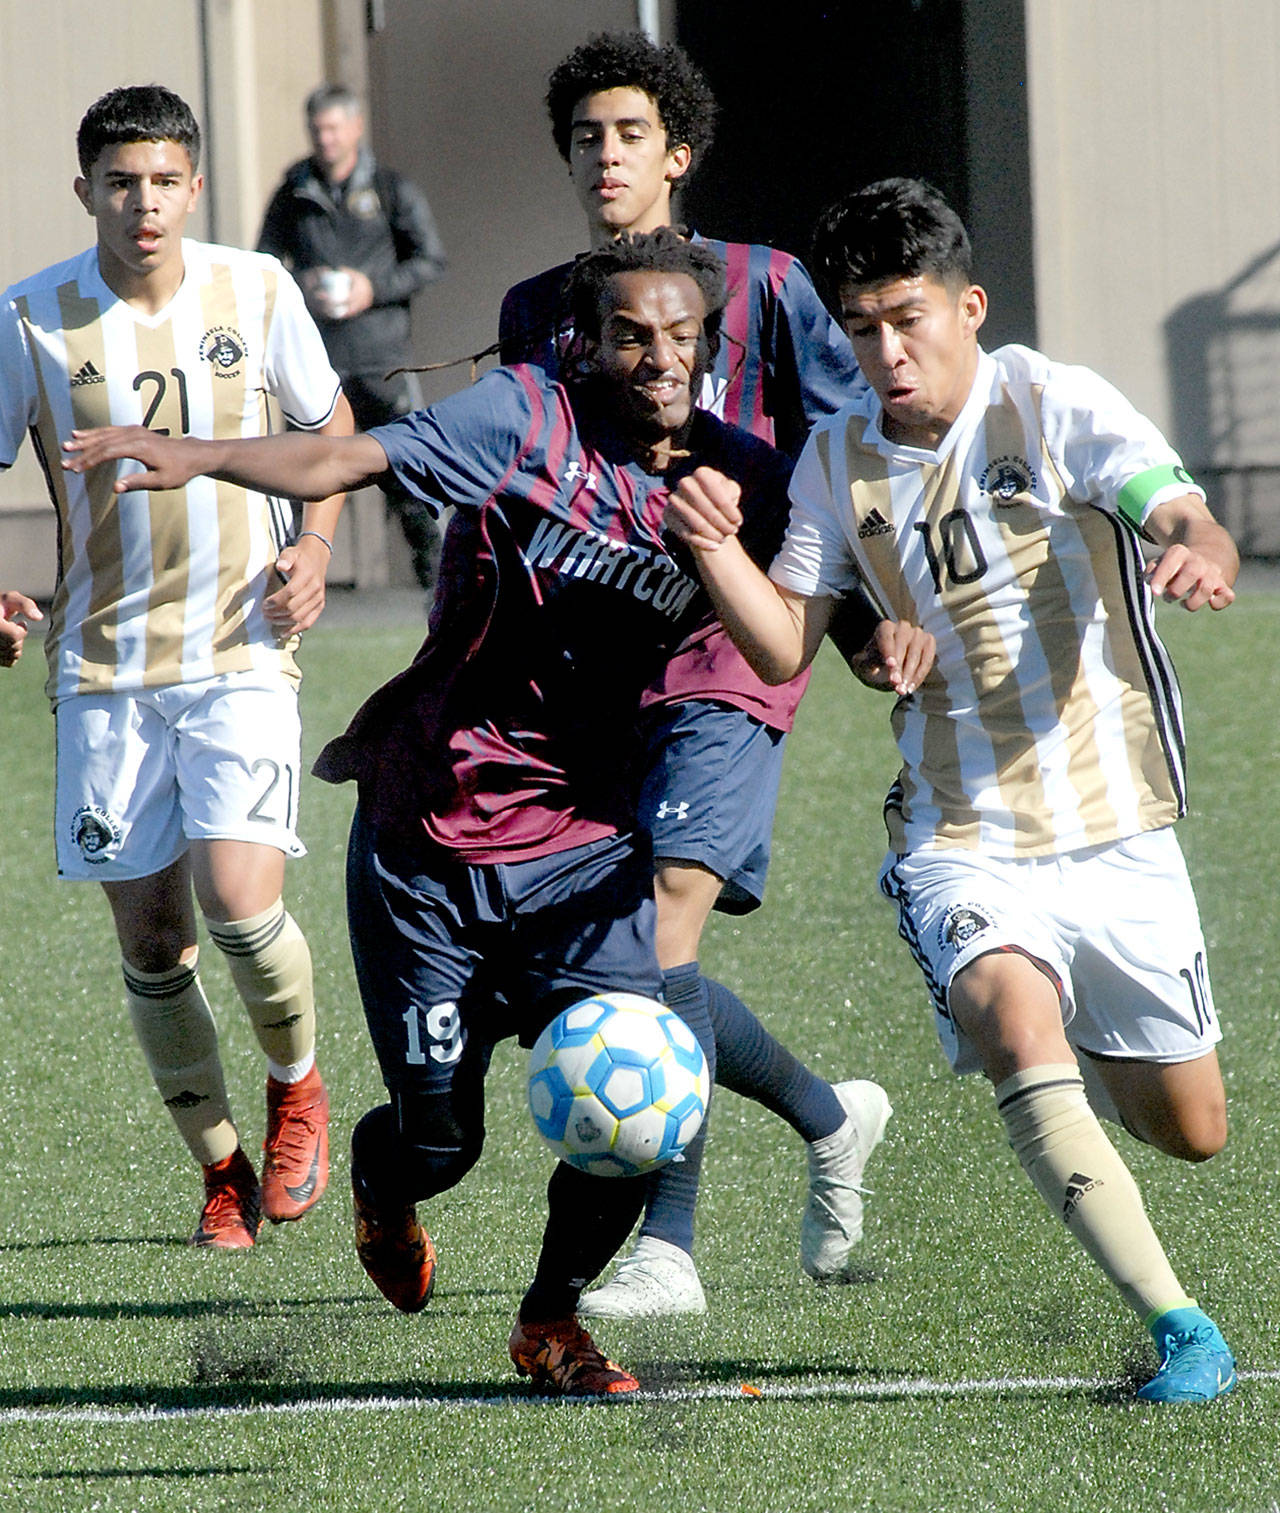 Keith Thorpe/Peninsula Daily News Whatcom’s Bekele Dowty, front left, and Peninsula’s Michael Benito battle for control during Saturday’s match at Wally Sigmar Field in Port Angeles. In the backround are Benito’s teammate, Edgar Tavares, left, and Whatcom’s Corey Williams.